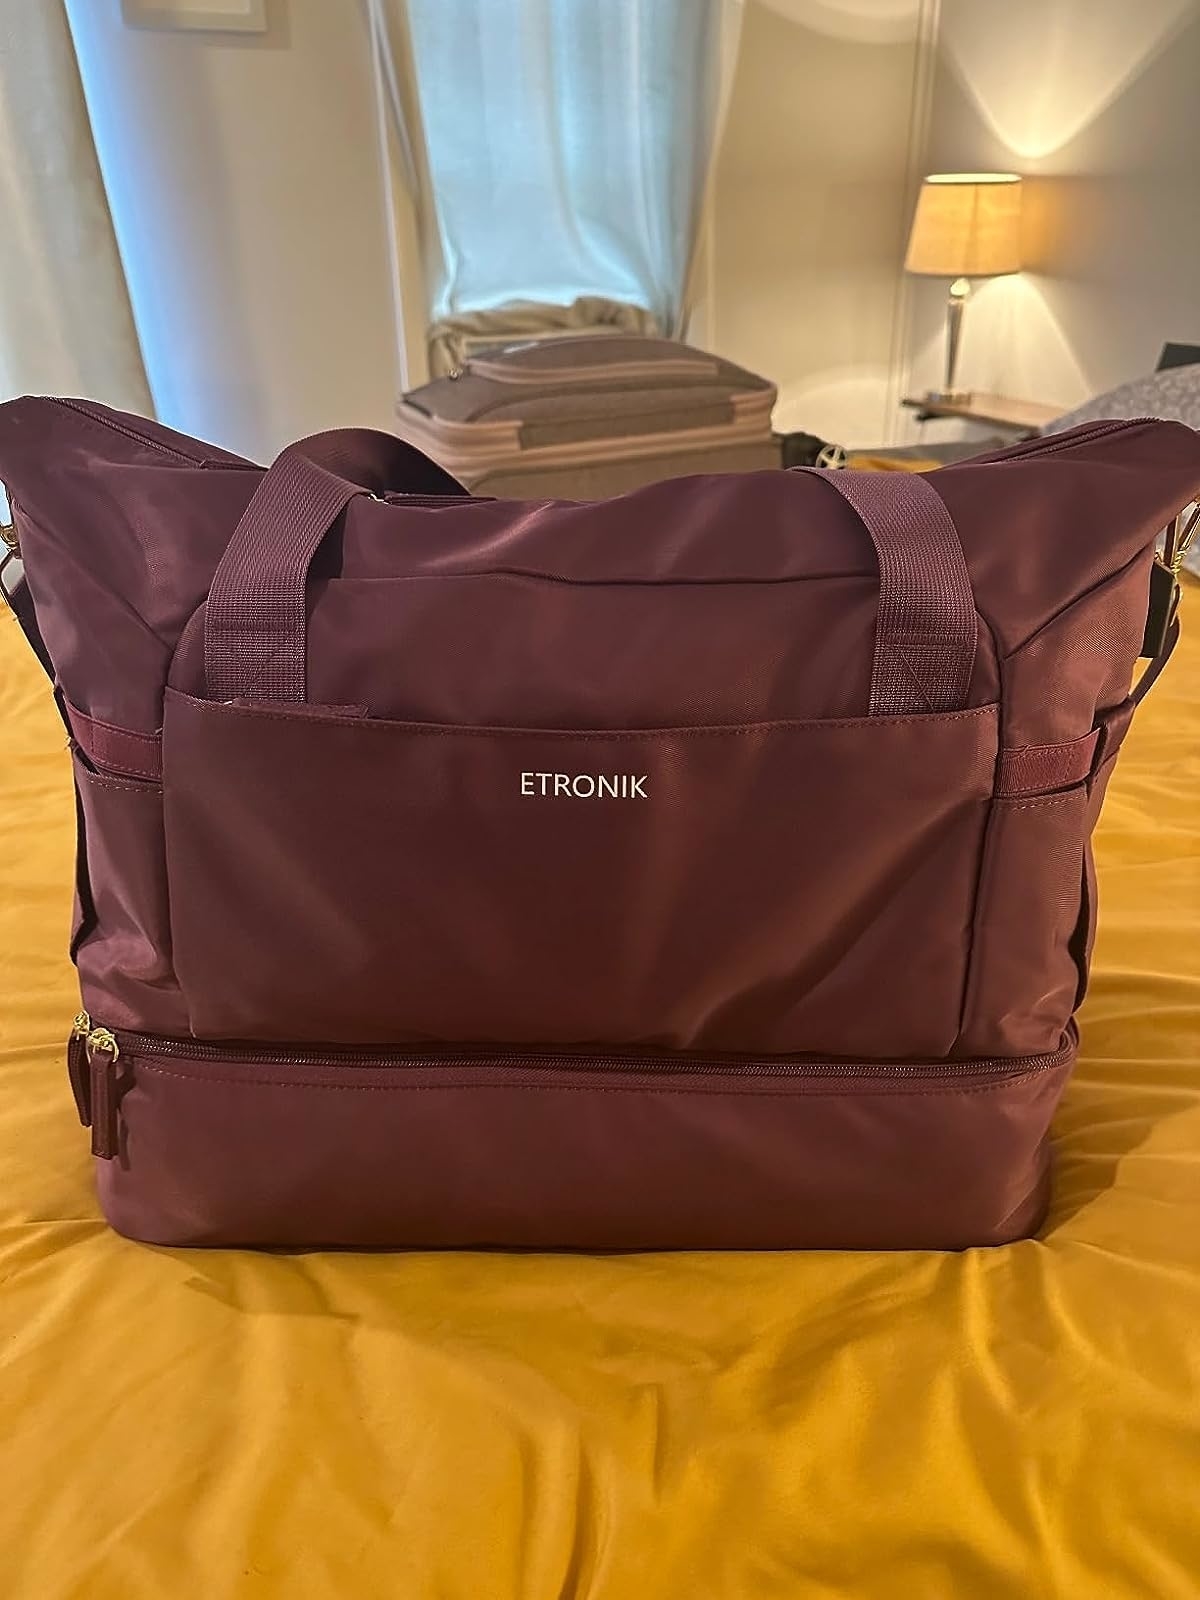 Reviewer image of the mauve bag on their bed